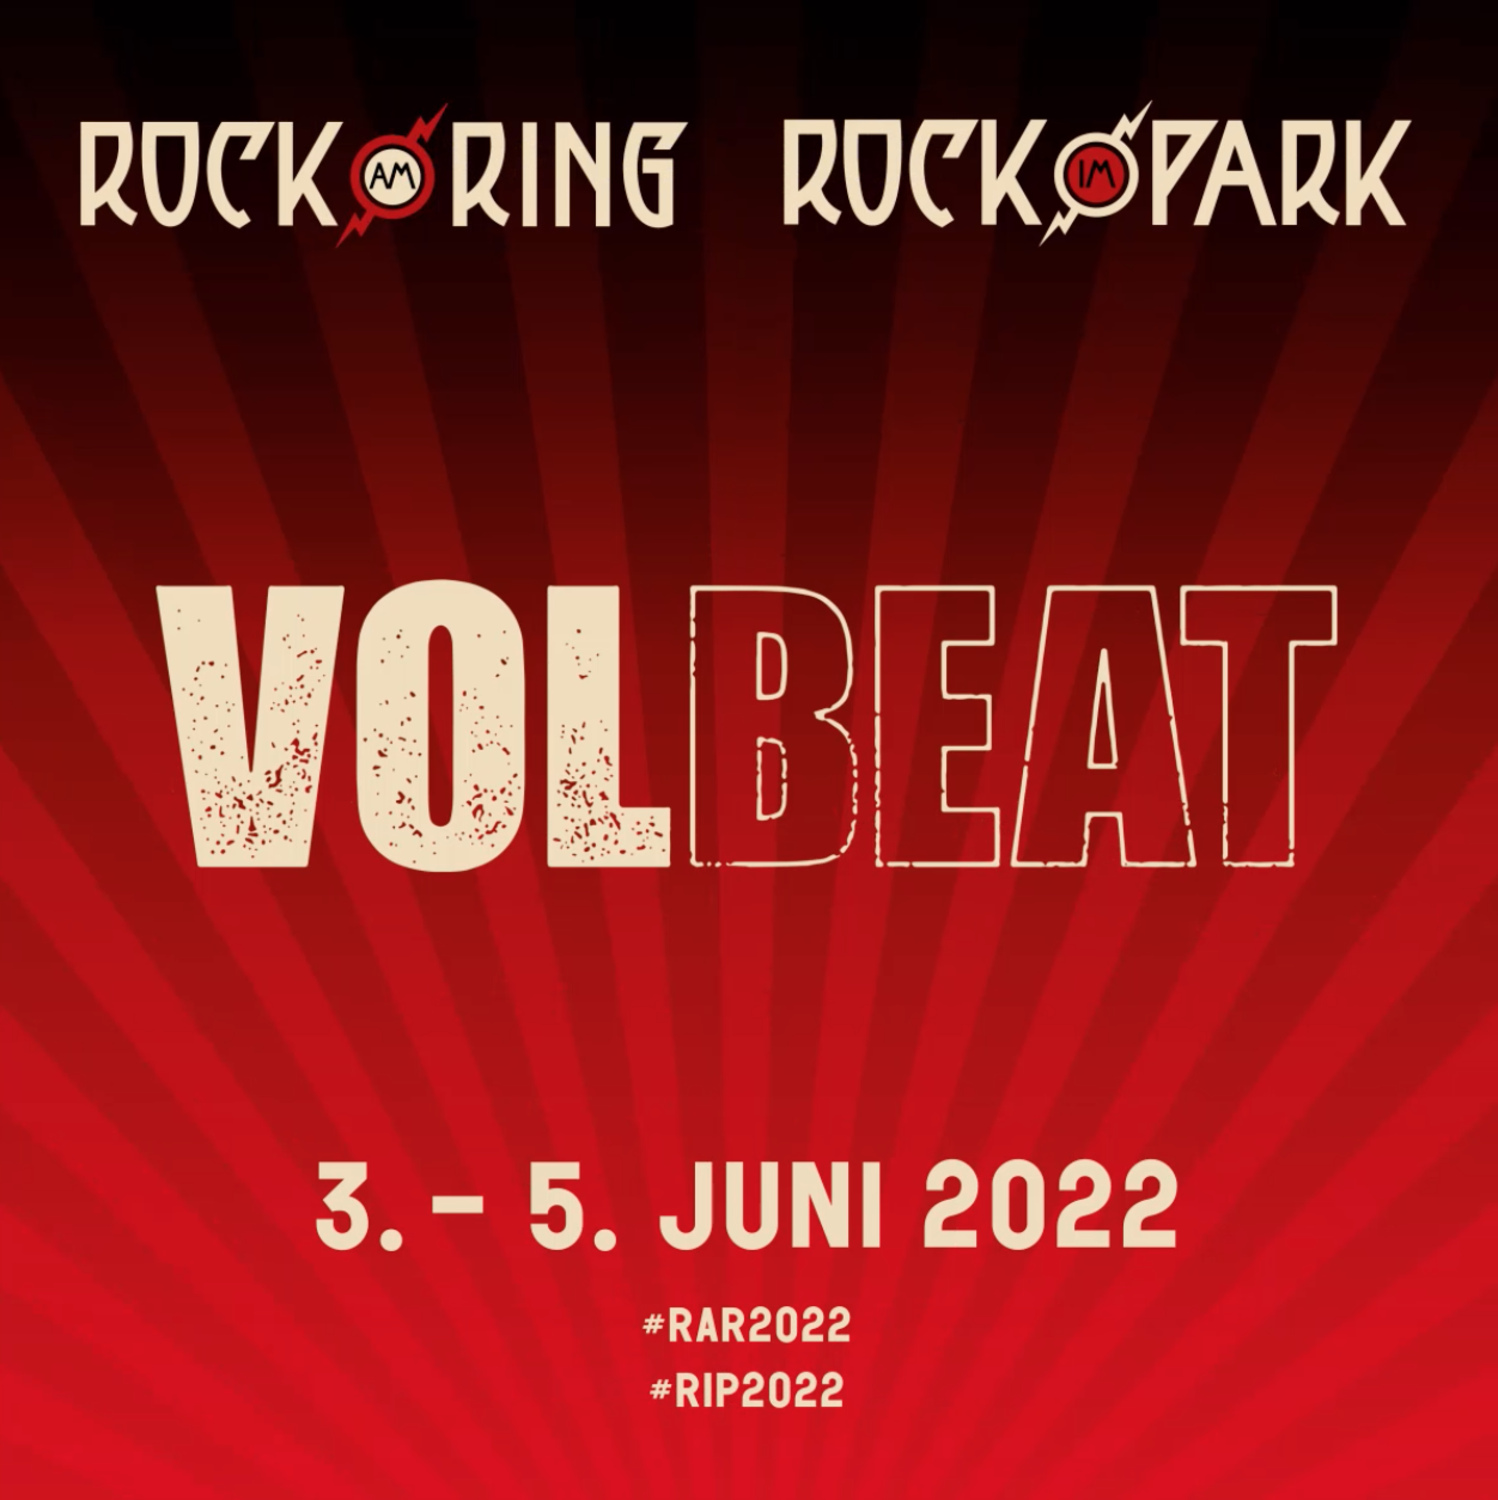 Rock am Ring / Rock im Park on the App Store